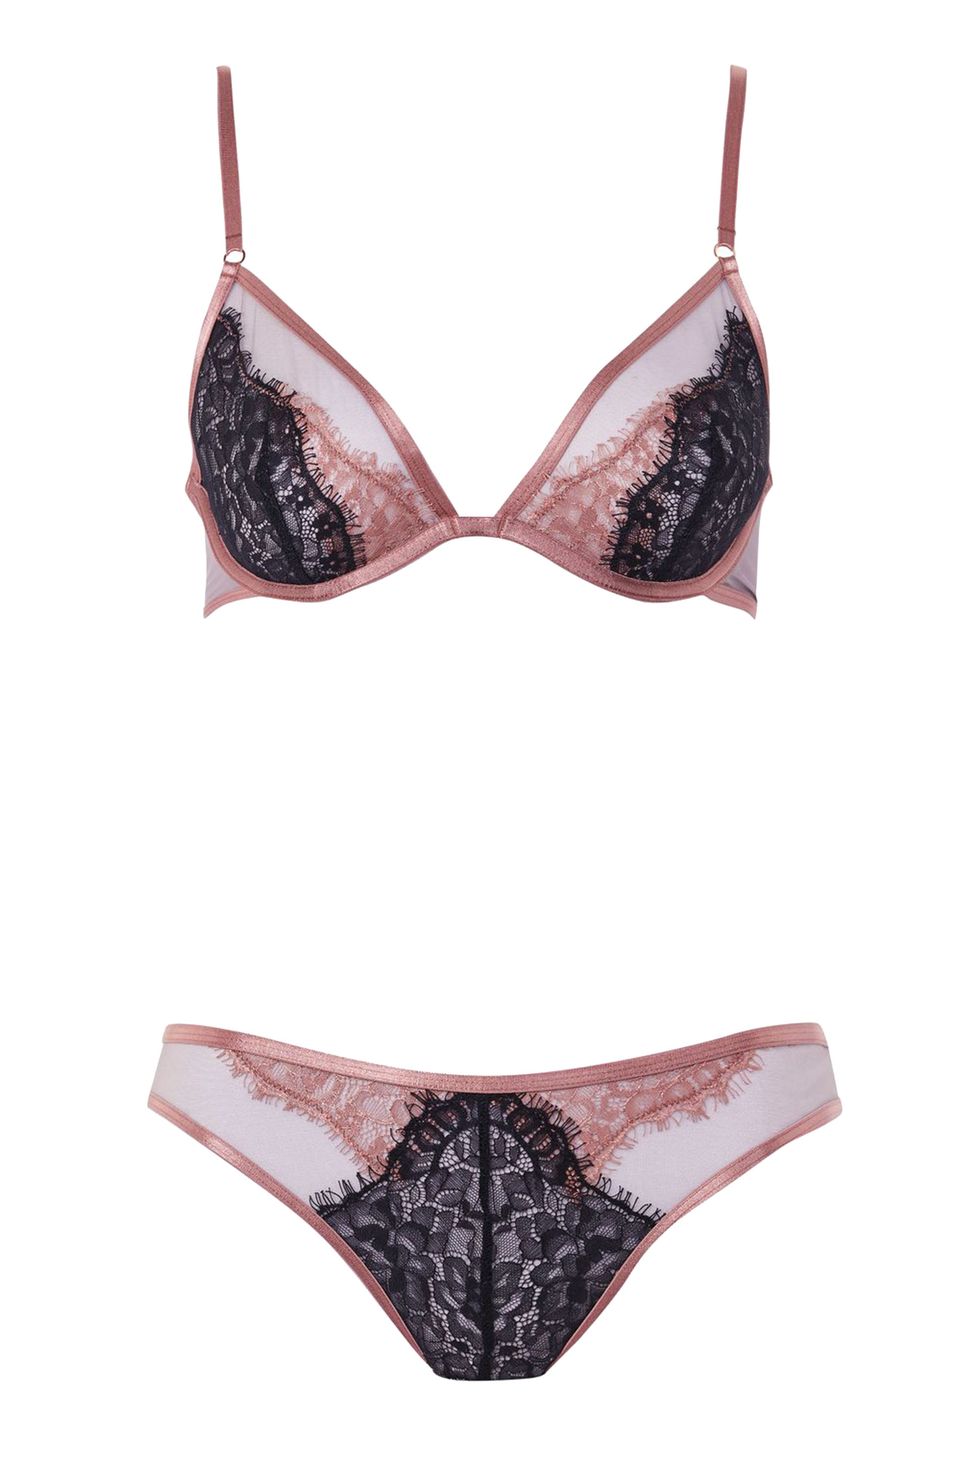 Sexy Valentine's Day Lingerie 2018 - Best Lingerie Gifts for Valentine's Day